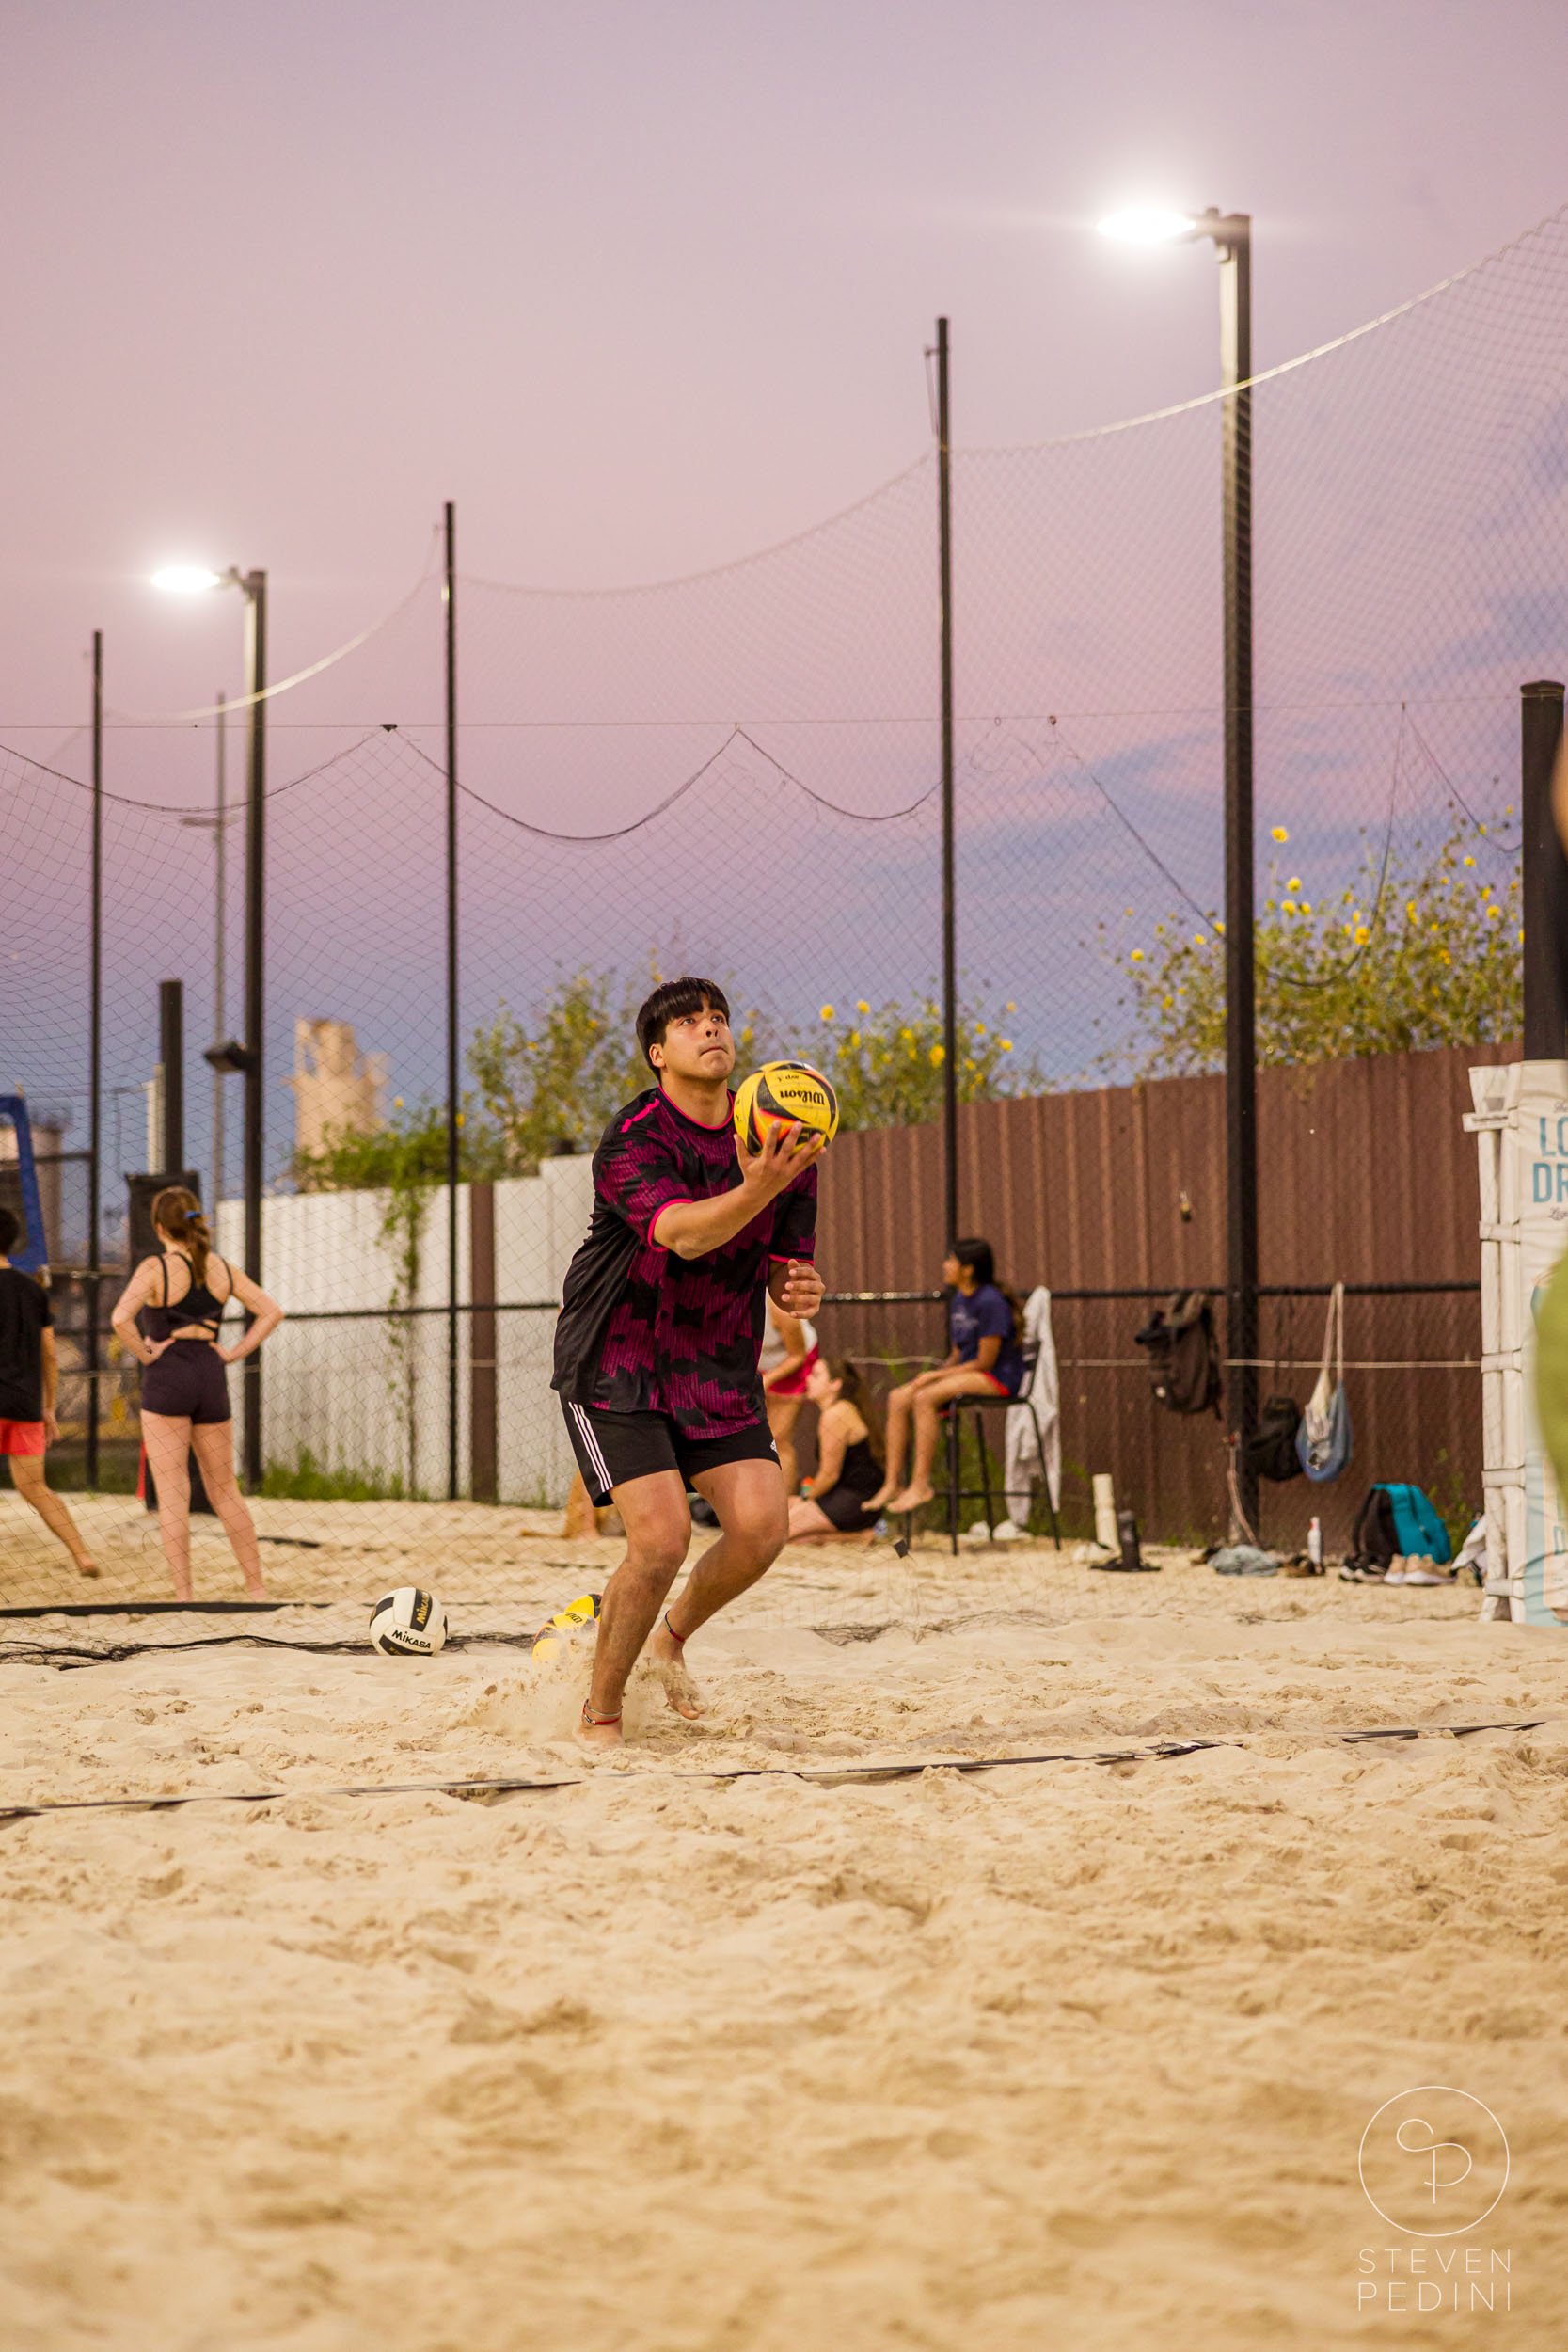 Steven Pedini Photography - Bumpy Pickle - Sand Volleyball - Houston TX - World Cup of Volleyball - 00282.jpg